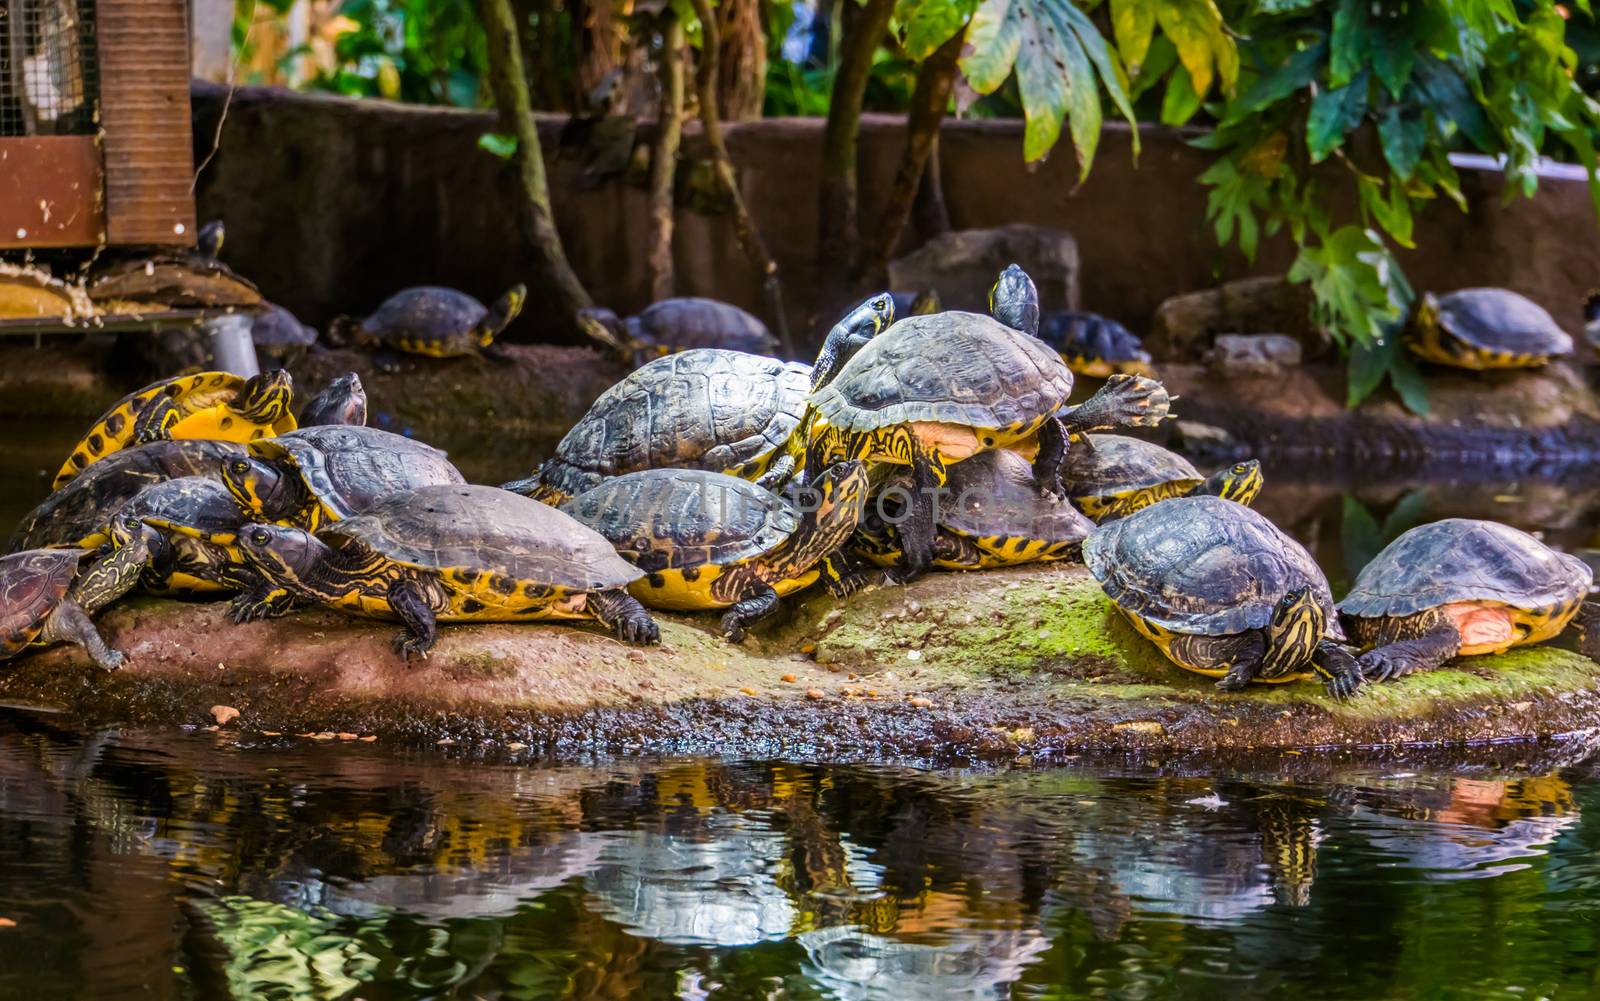 big yellow bellied cumberland slider turtle nest together on a rock, tropical reptile specie from America by charlottebleijenberg